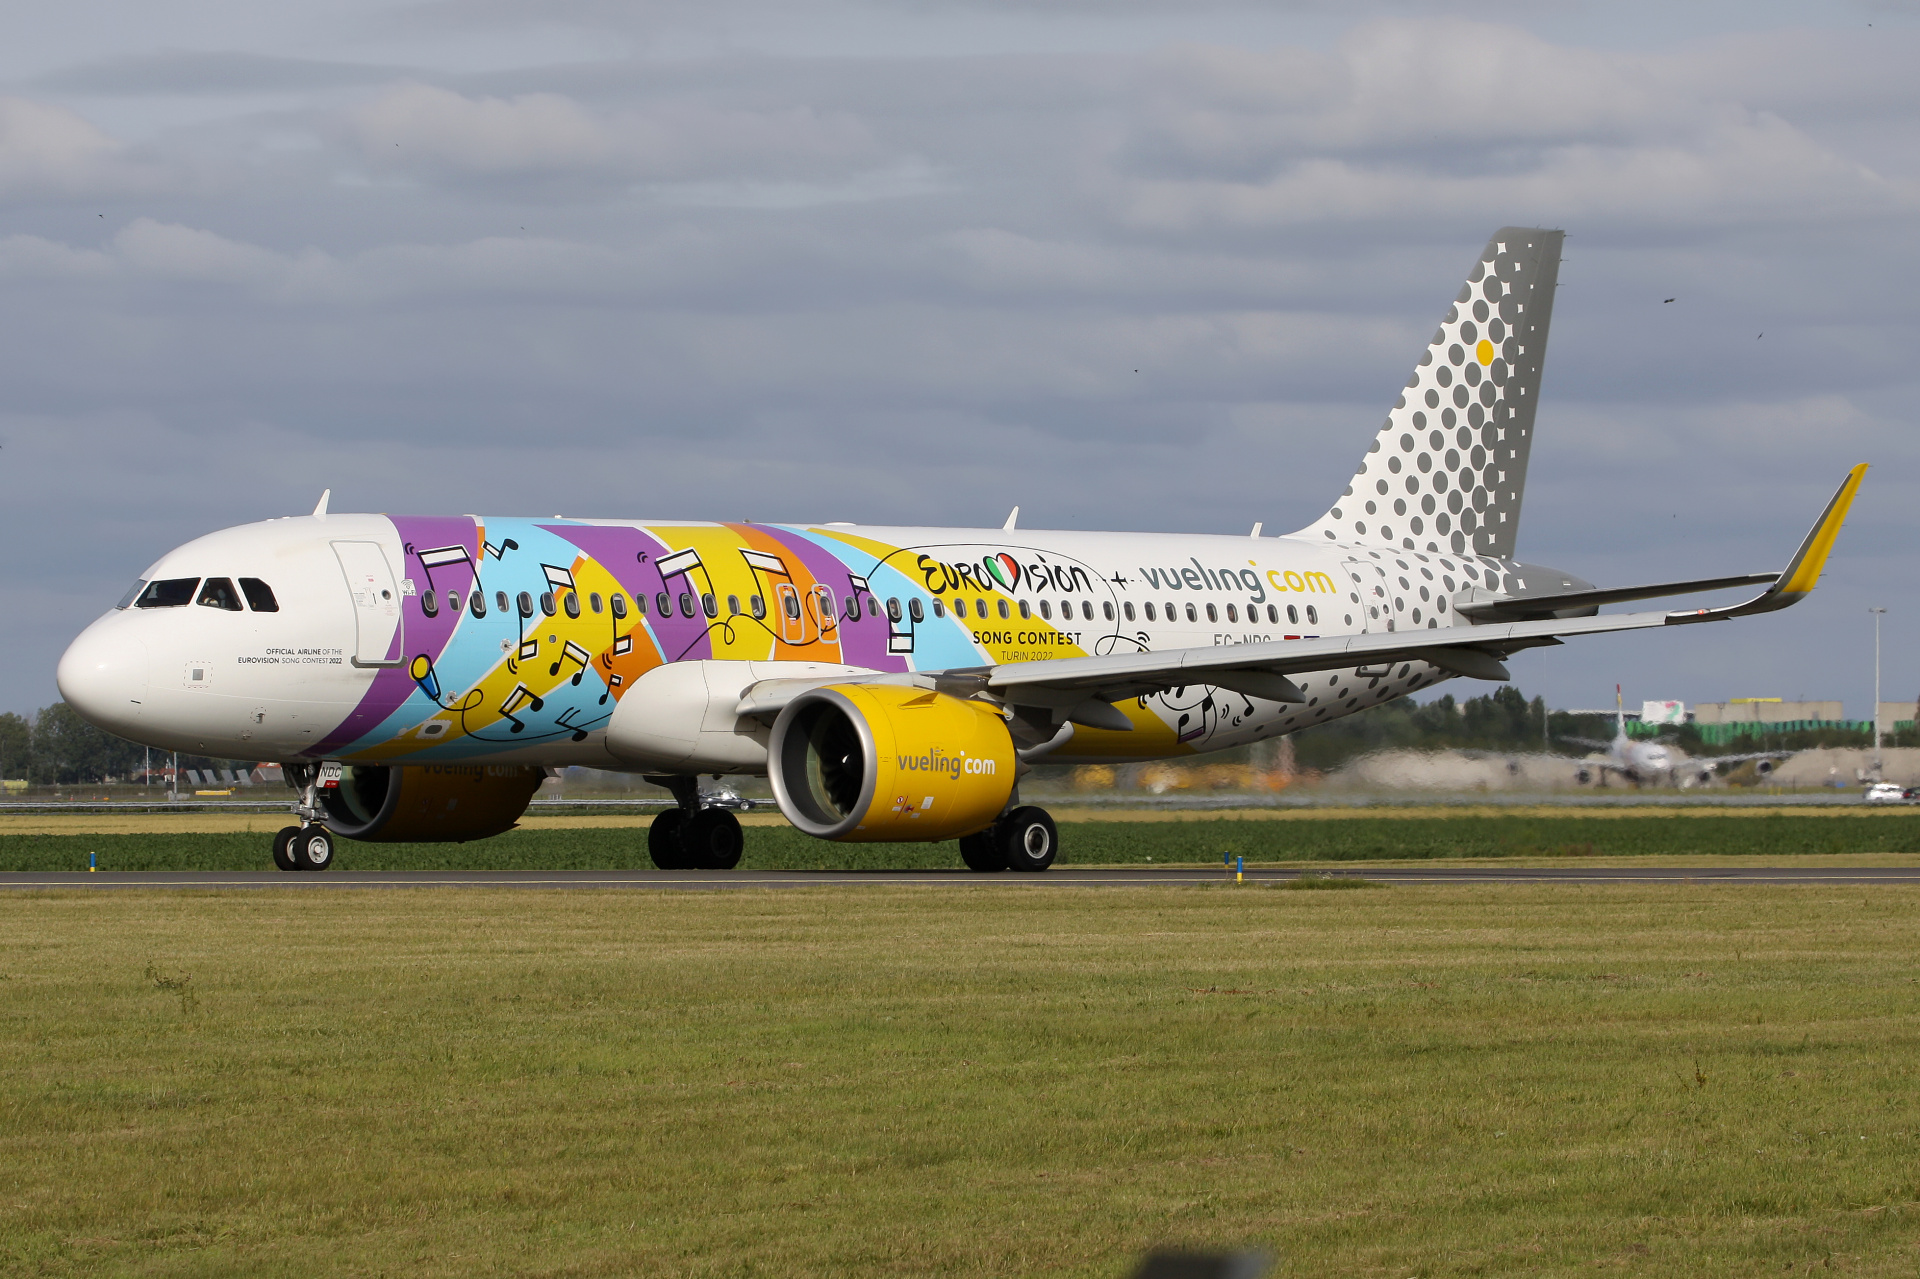 EC-NDC (Eurovision Song Contest 2022 livery) (Aircraft » Schiphol Spotting » Airbus A320neo » Vueling Airlines)